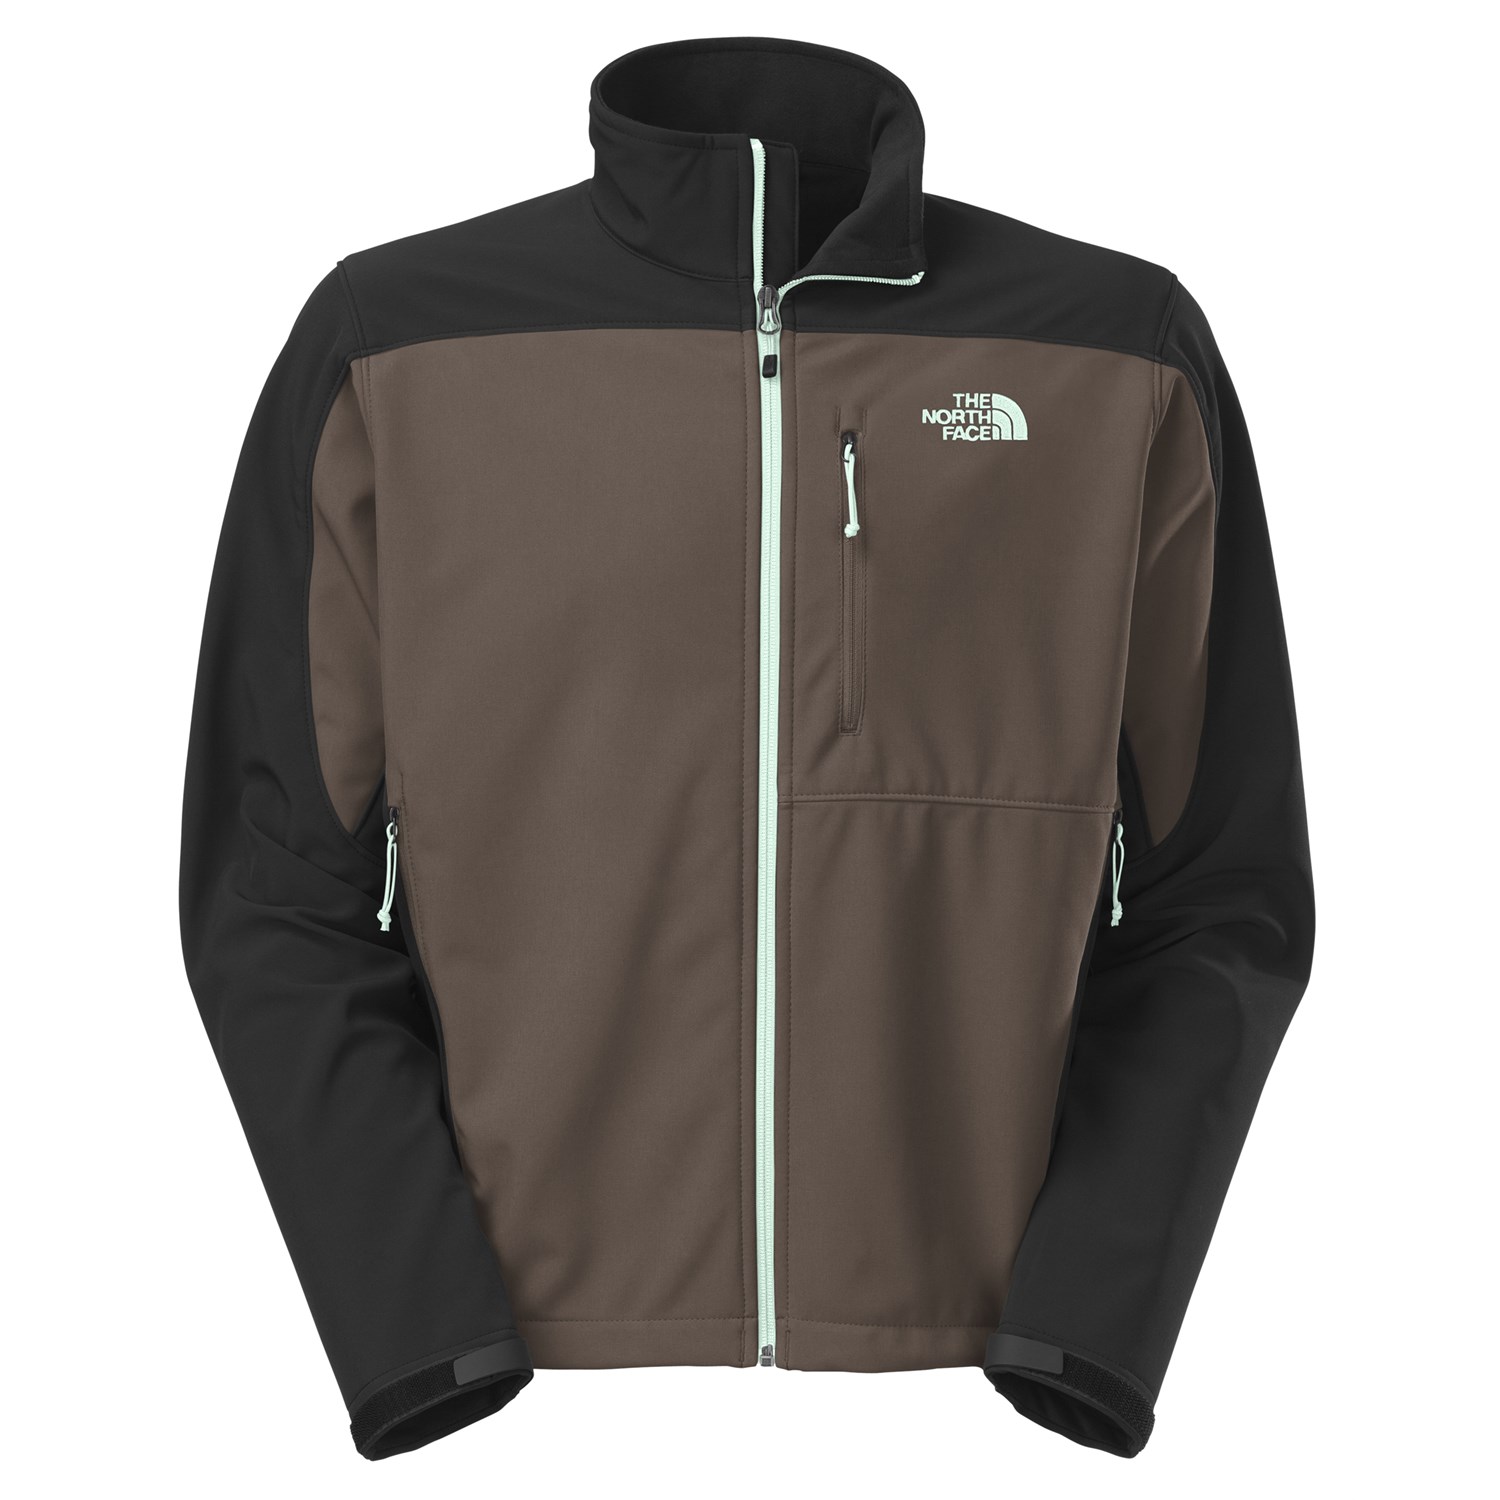 north face bionic jacket